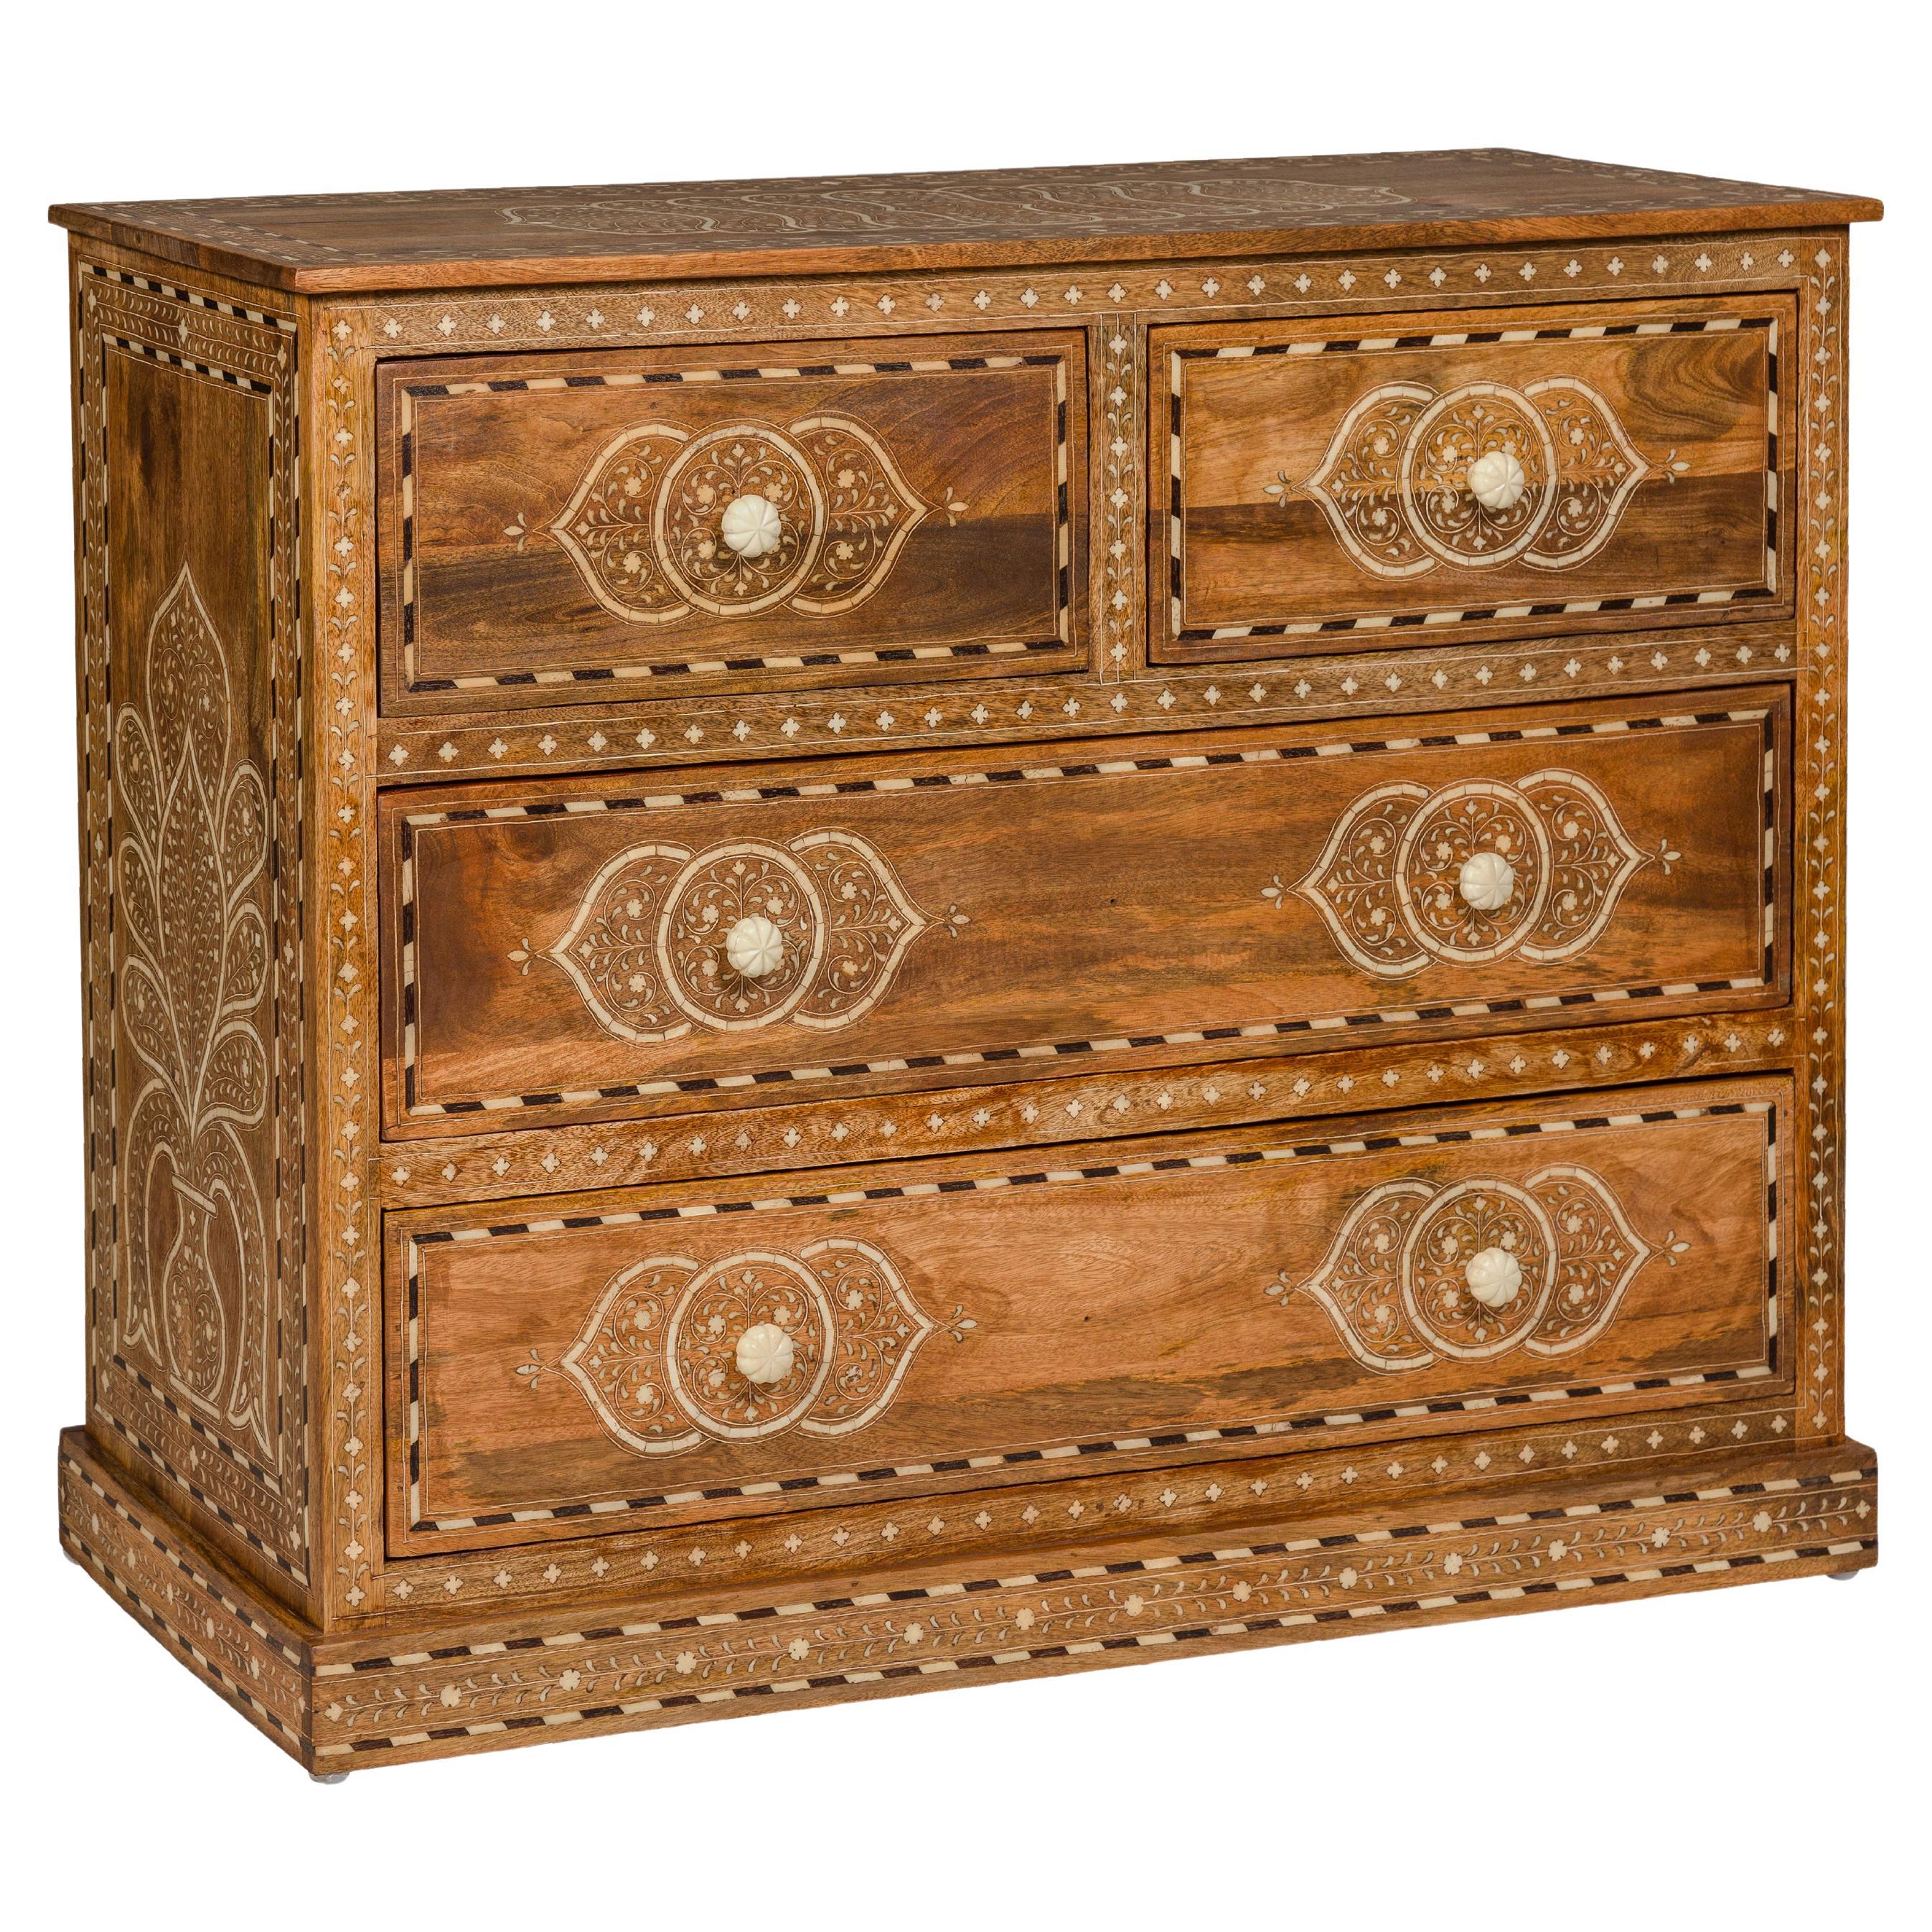 Anglo Indian Style Mango Wood Chest with Four Drawers and Floral Bone Inlay For Sale